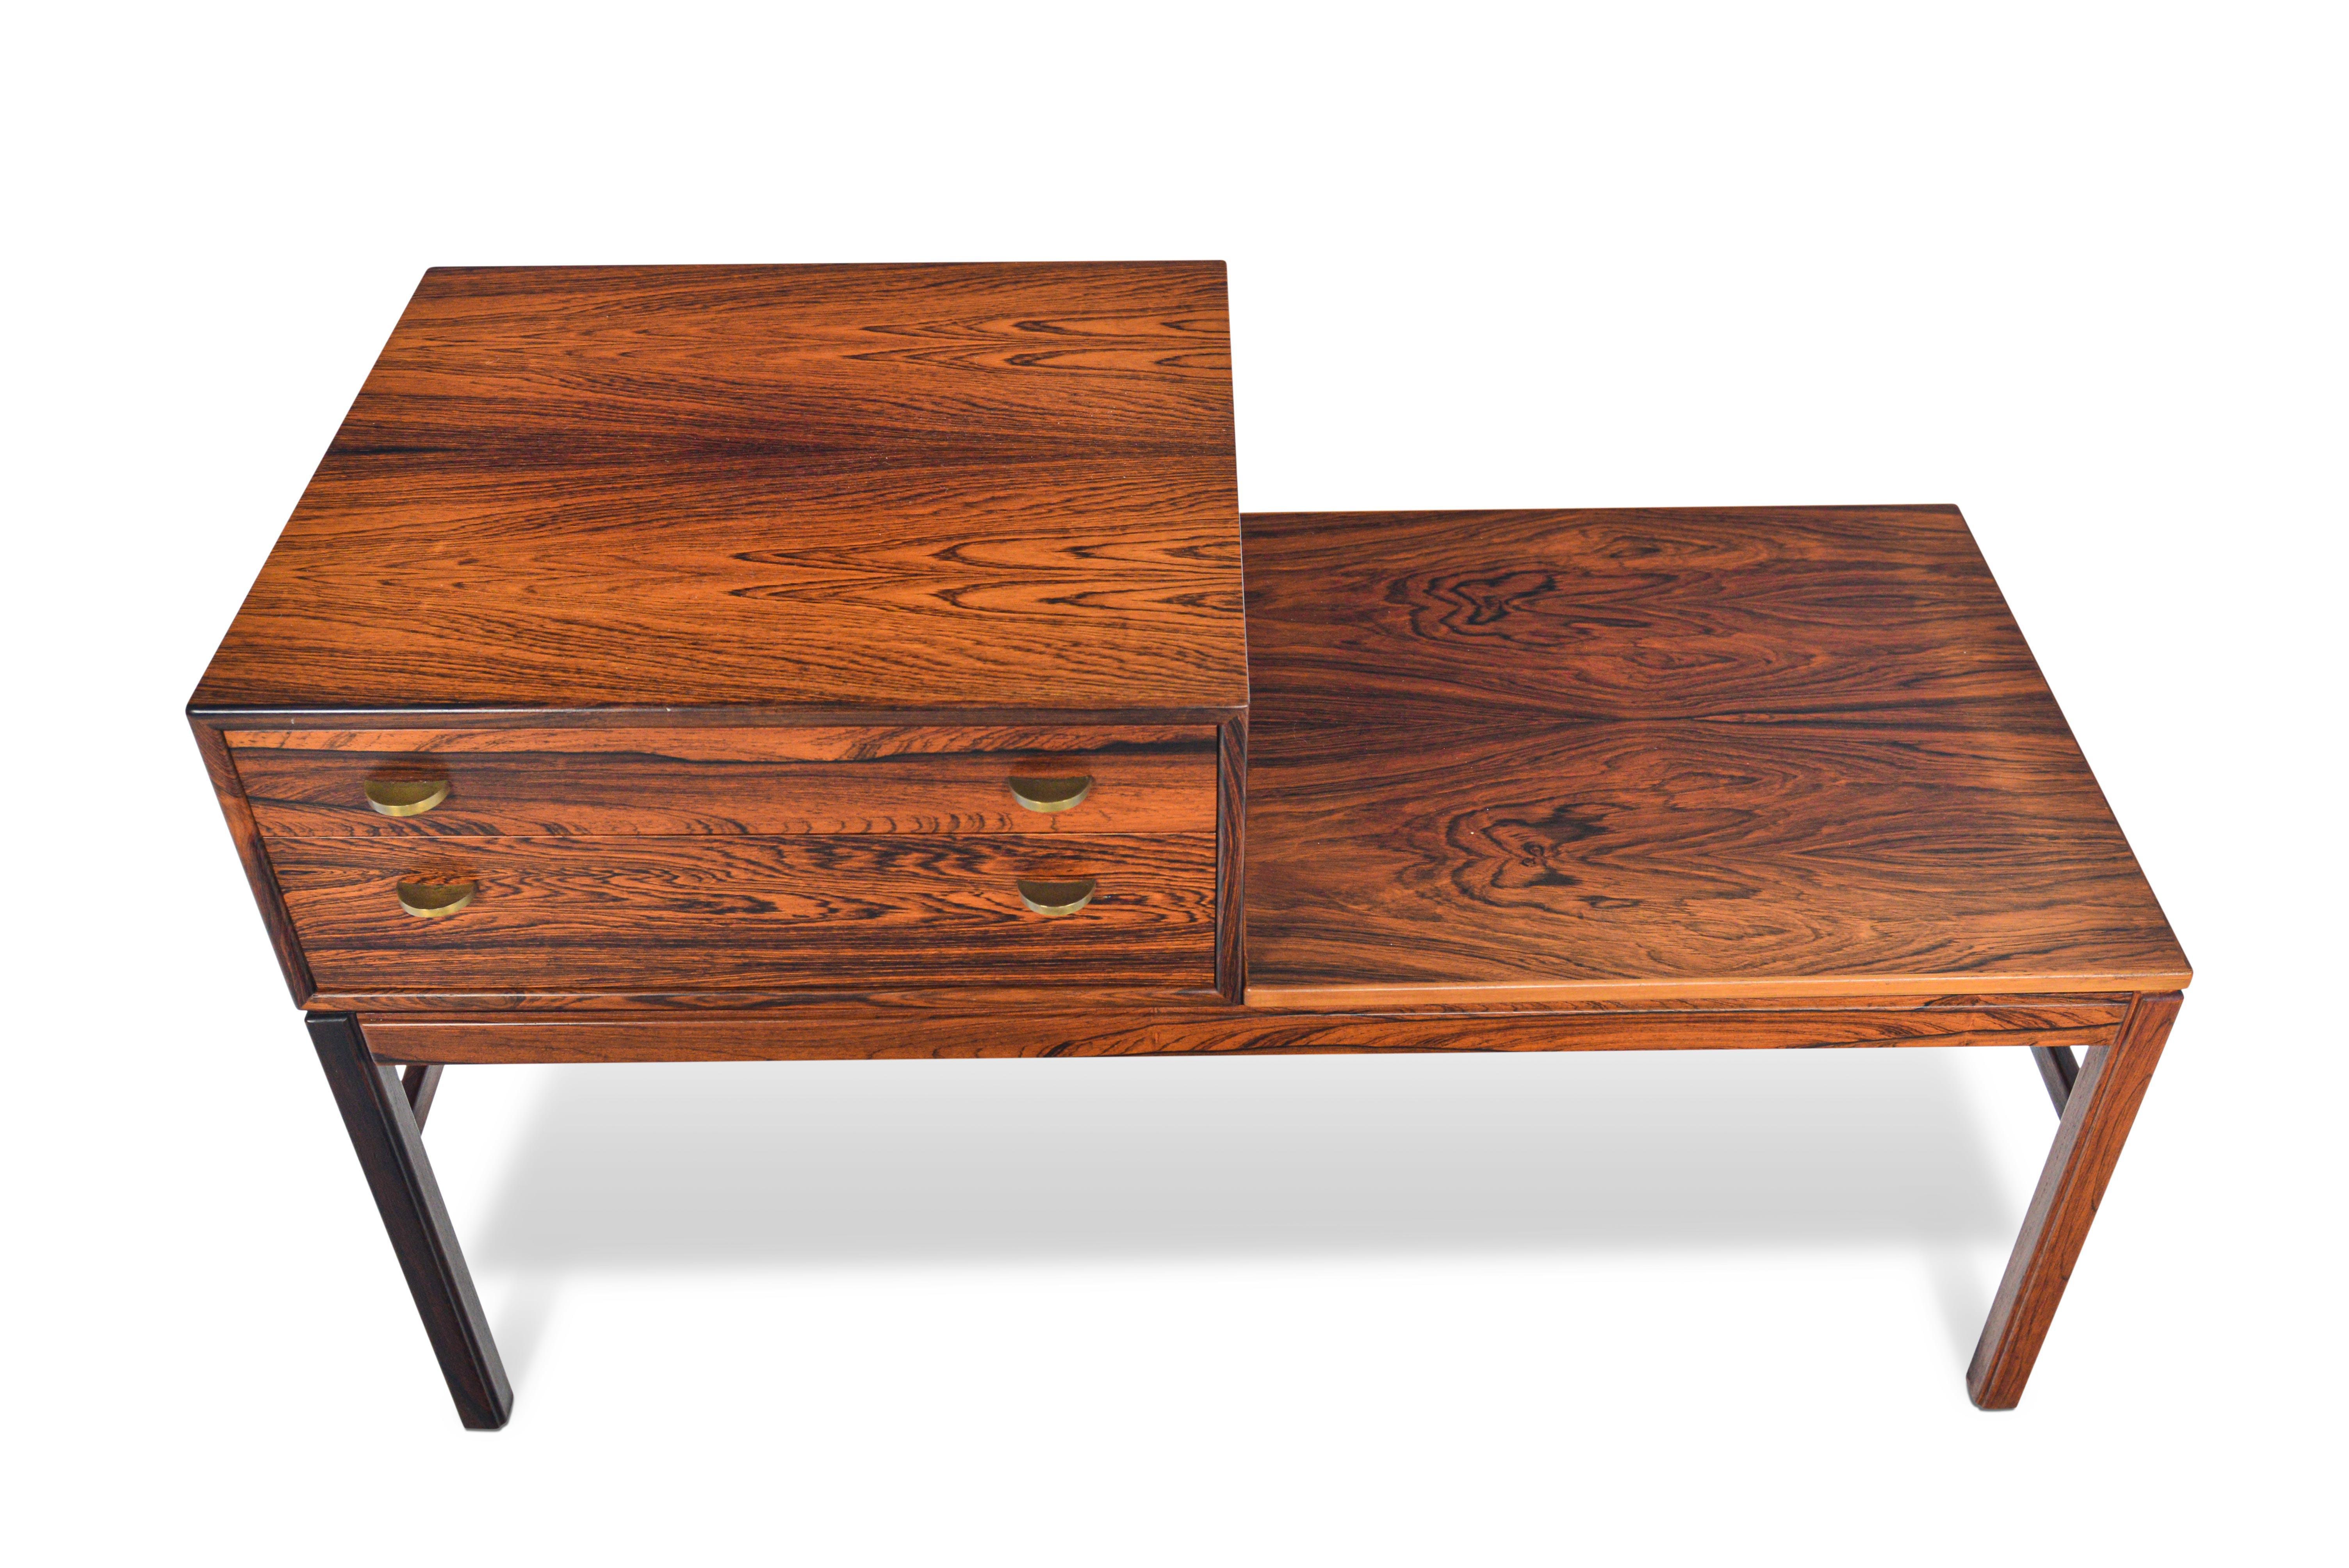 This exceptional Swedish modern “Casino” model telephone bench in Brazilian rosewood was designed by Sven Engström & Gunnar Myrstrand for Tingströms, Bra Bohag in the 1960s. This large bench offers a removable case with a two drawers with brass